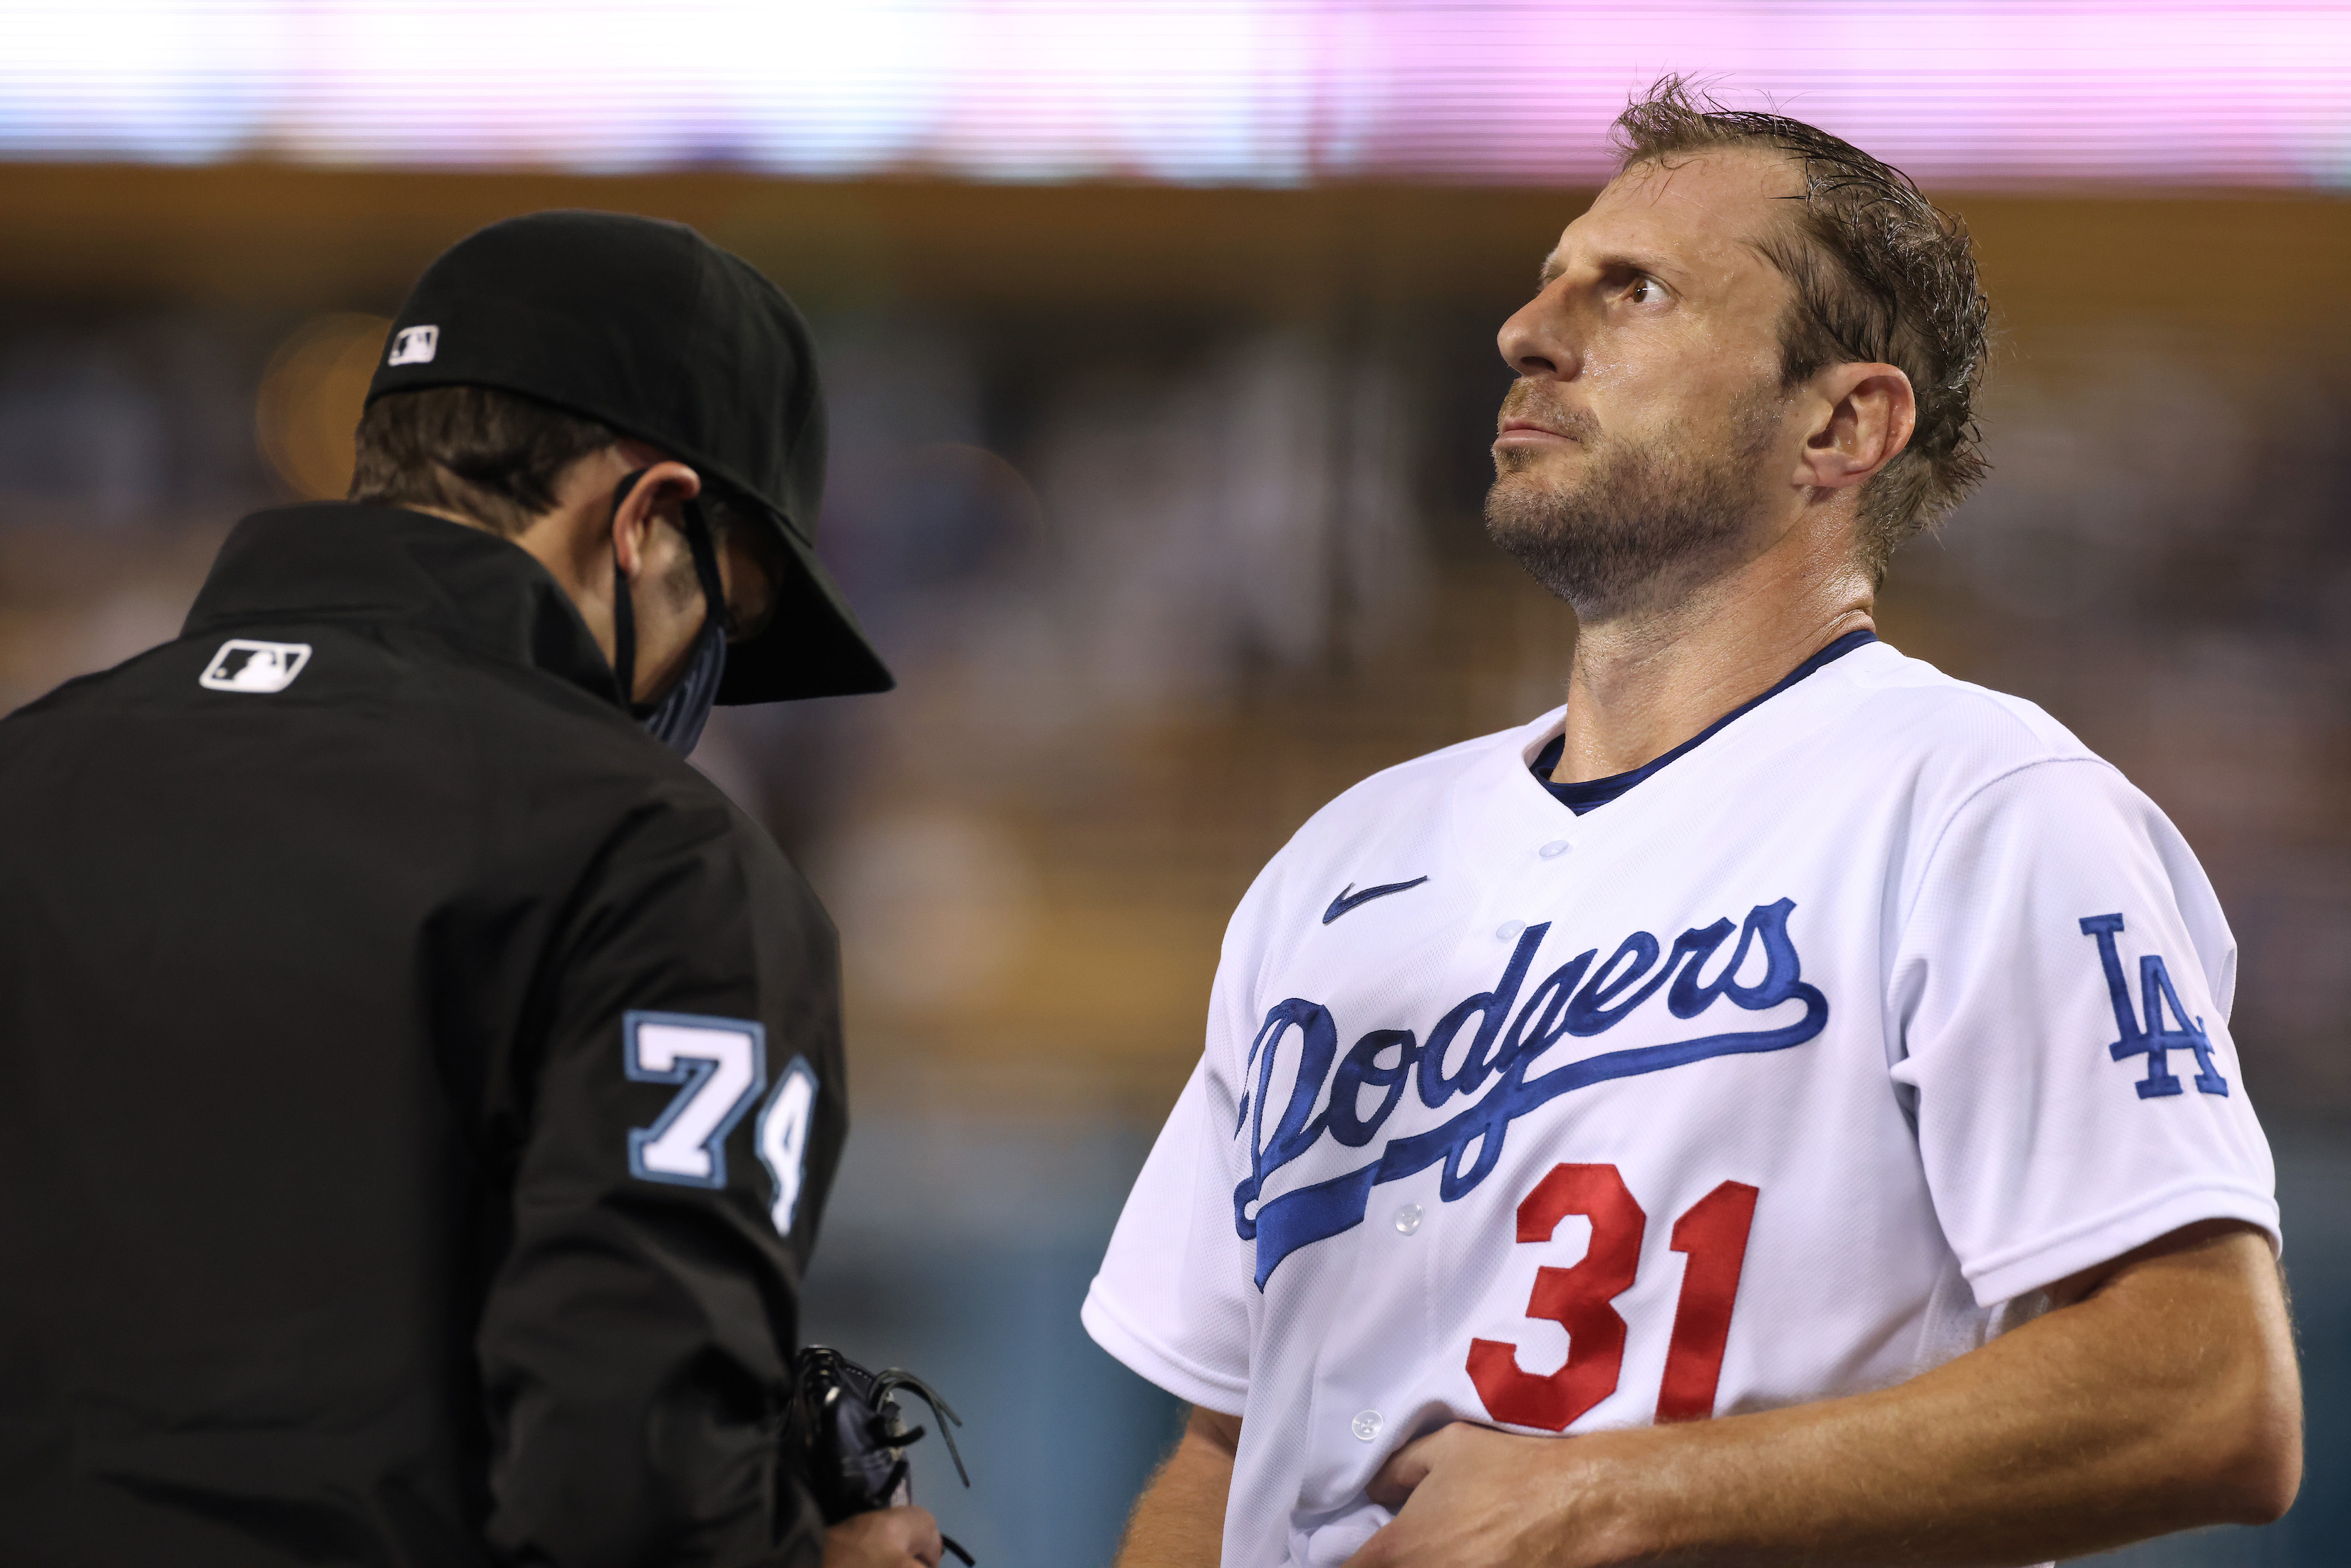 Max Scherzer is very patiently inspected for sticky stuff contamination during a September Dodgers game.